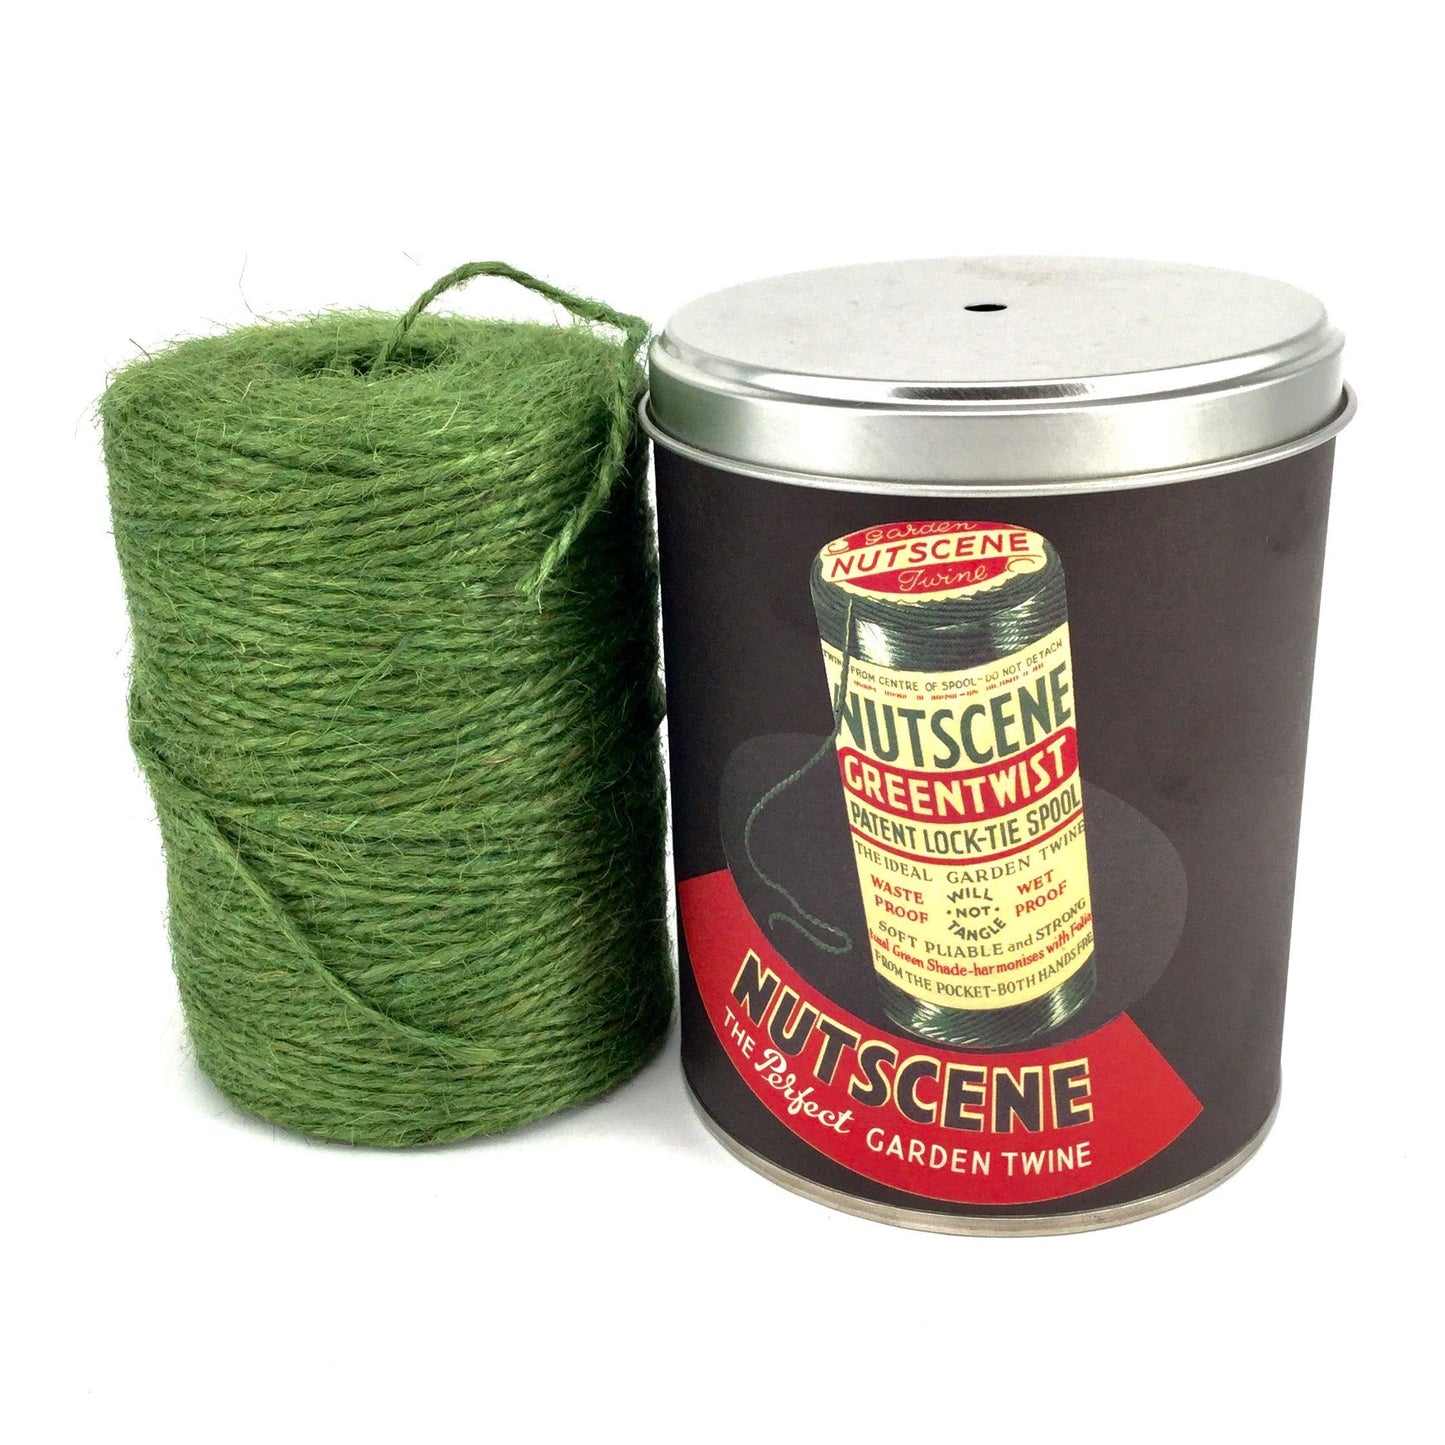 Twine in a Tin Retro Style Green 2ply Twine 200M